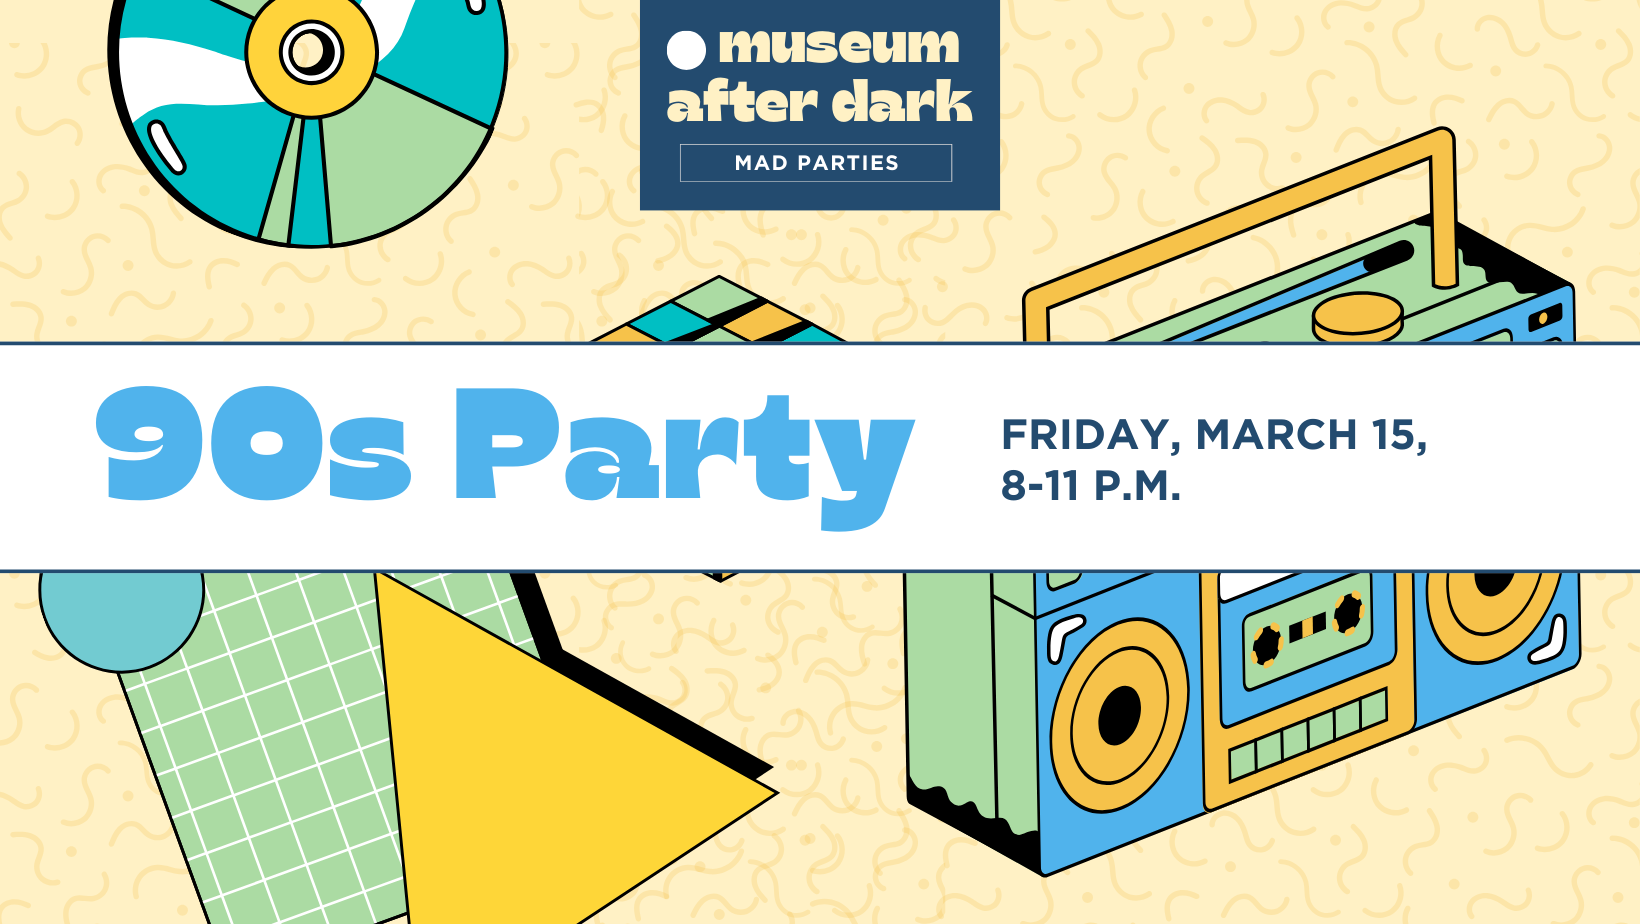 Museum After Dark | 90s Party